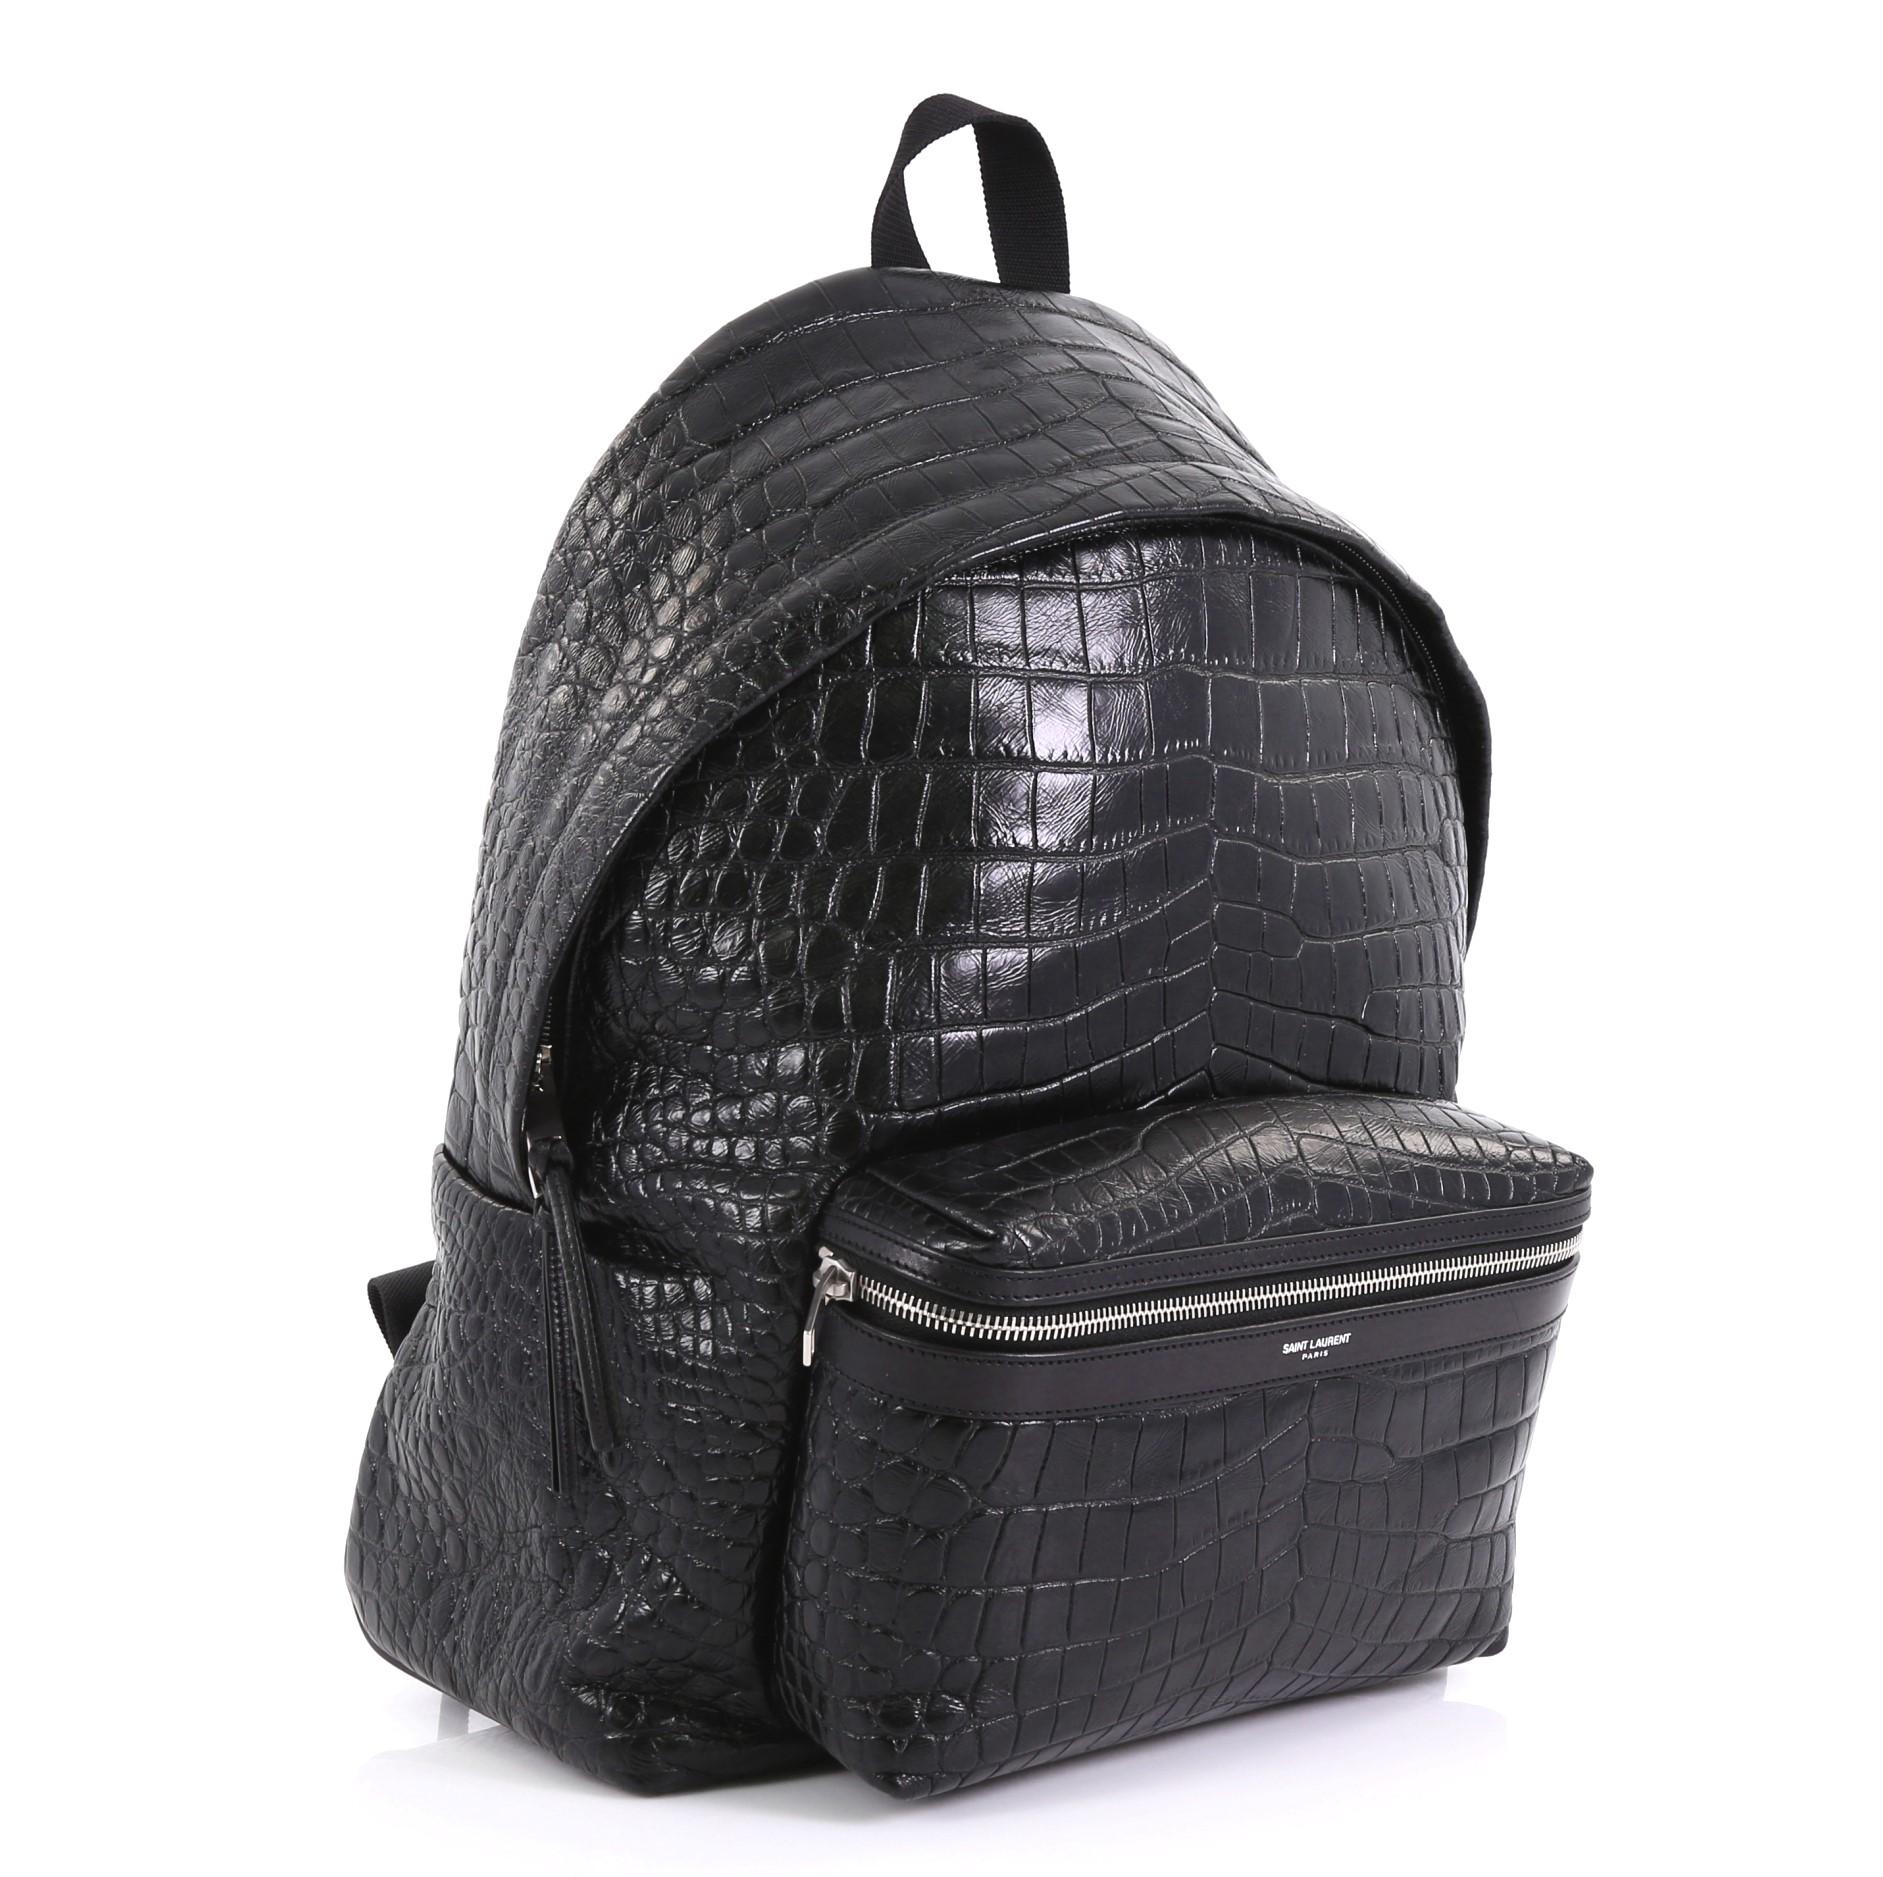 This Saint Laurent City Backpack Crocodile Embossed Leather Medium, crafted from black crocodile embossed leather, features adjustable padded straps, exterior front zip pocket, and silver-tone hardware. Its two-way zip closure opens to a black